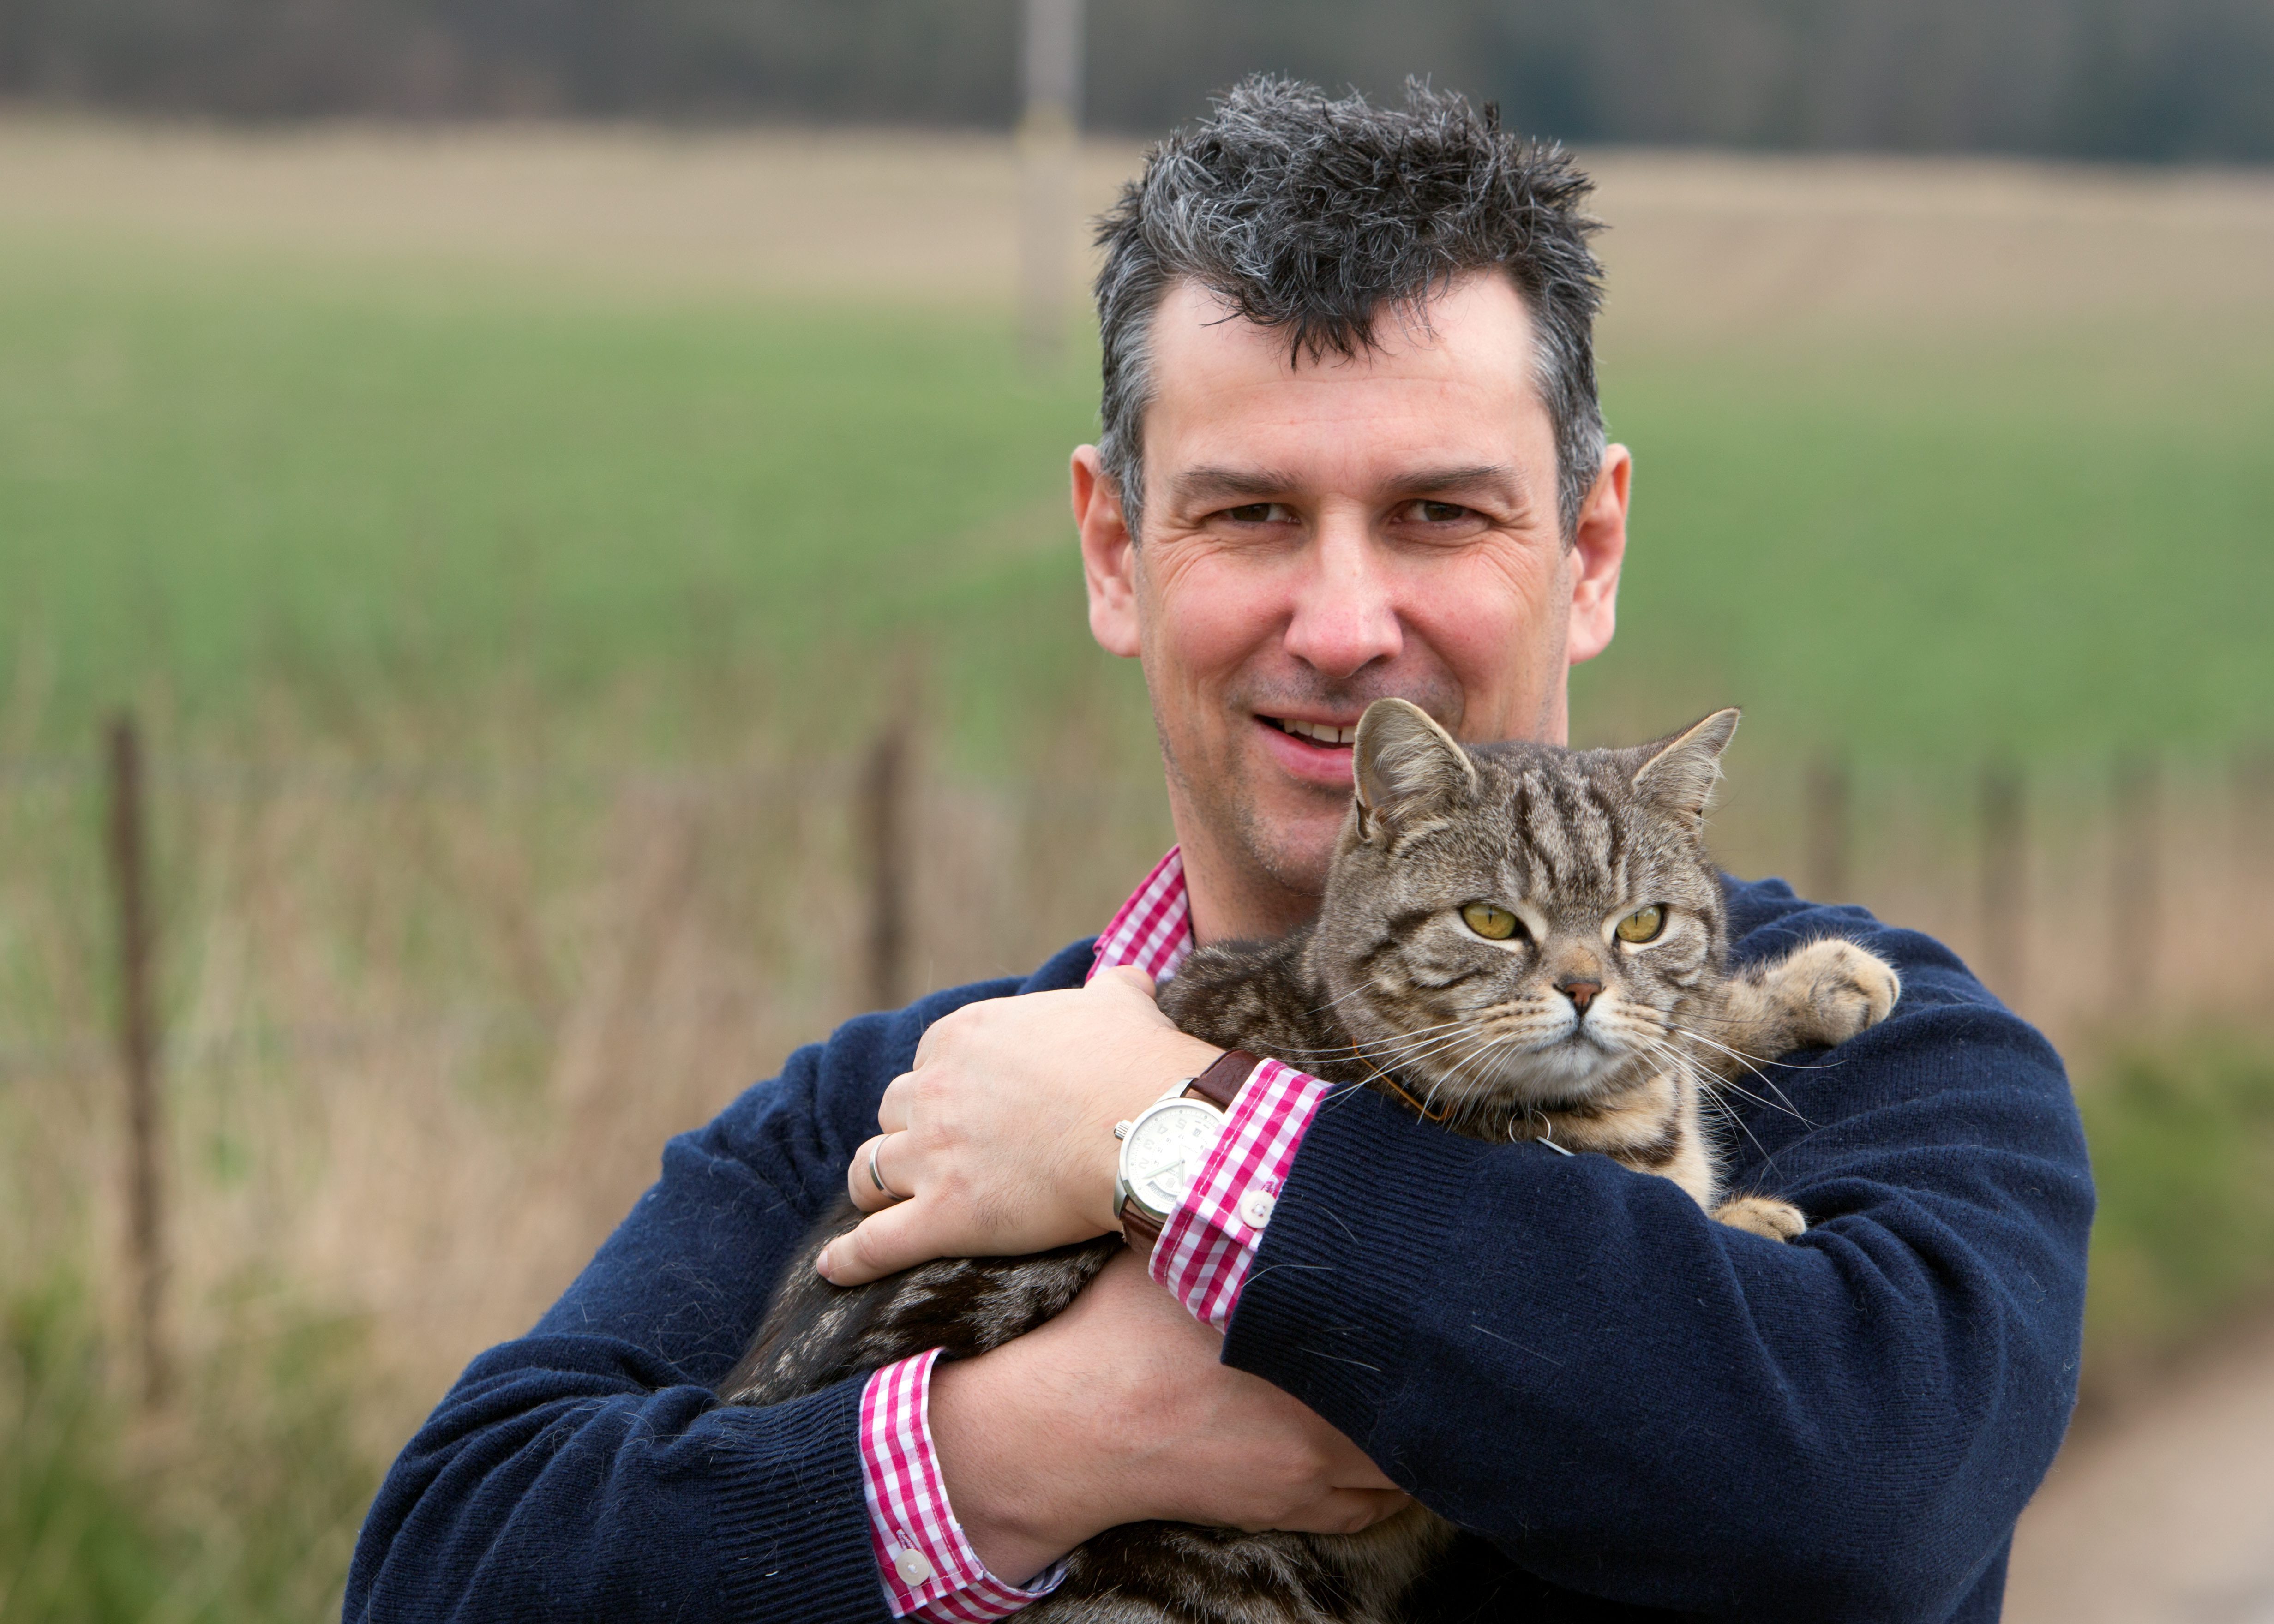 Dave Evans, 42, marketing manager, Marlborough, with 'Yollo' the cat, wearing a G-Paws GPS tracker. 27 March 2013 See swns story SWCATNAV. A pet owner has developed a new tracking device for animals dubbed 'Cat Nav' - which tracks their every move and maps it on Google. Dad-of-two Dave Evans from Marlborough, Wilts came up with the idea because his own silver tabby Yollo was mysteriously disappearing and putting on weight each day. He developed an ultra-light GPS which fixes to the pet's collar and records where it has been. When the animal returns home the information is downloaded via a USB cable direct to a website which reveals its secret life on Google Earth satellite images. Dave, 41, says the weatherproof tracker, weighing just 15g, will cost £50 and can be used for cats and dogs.